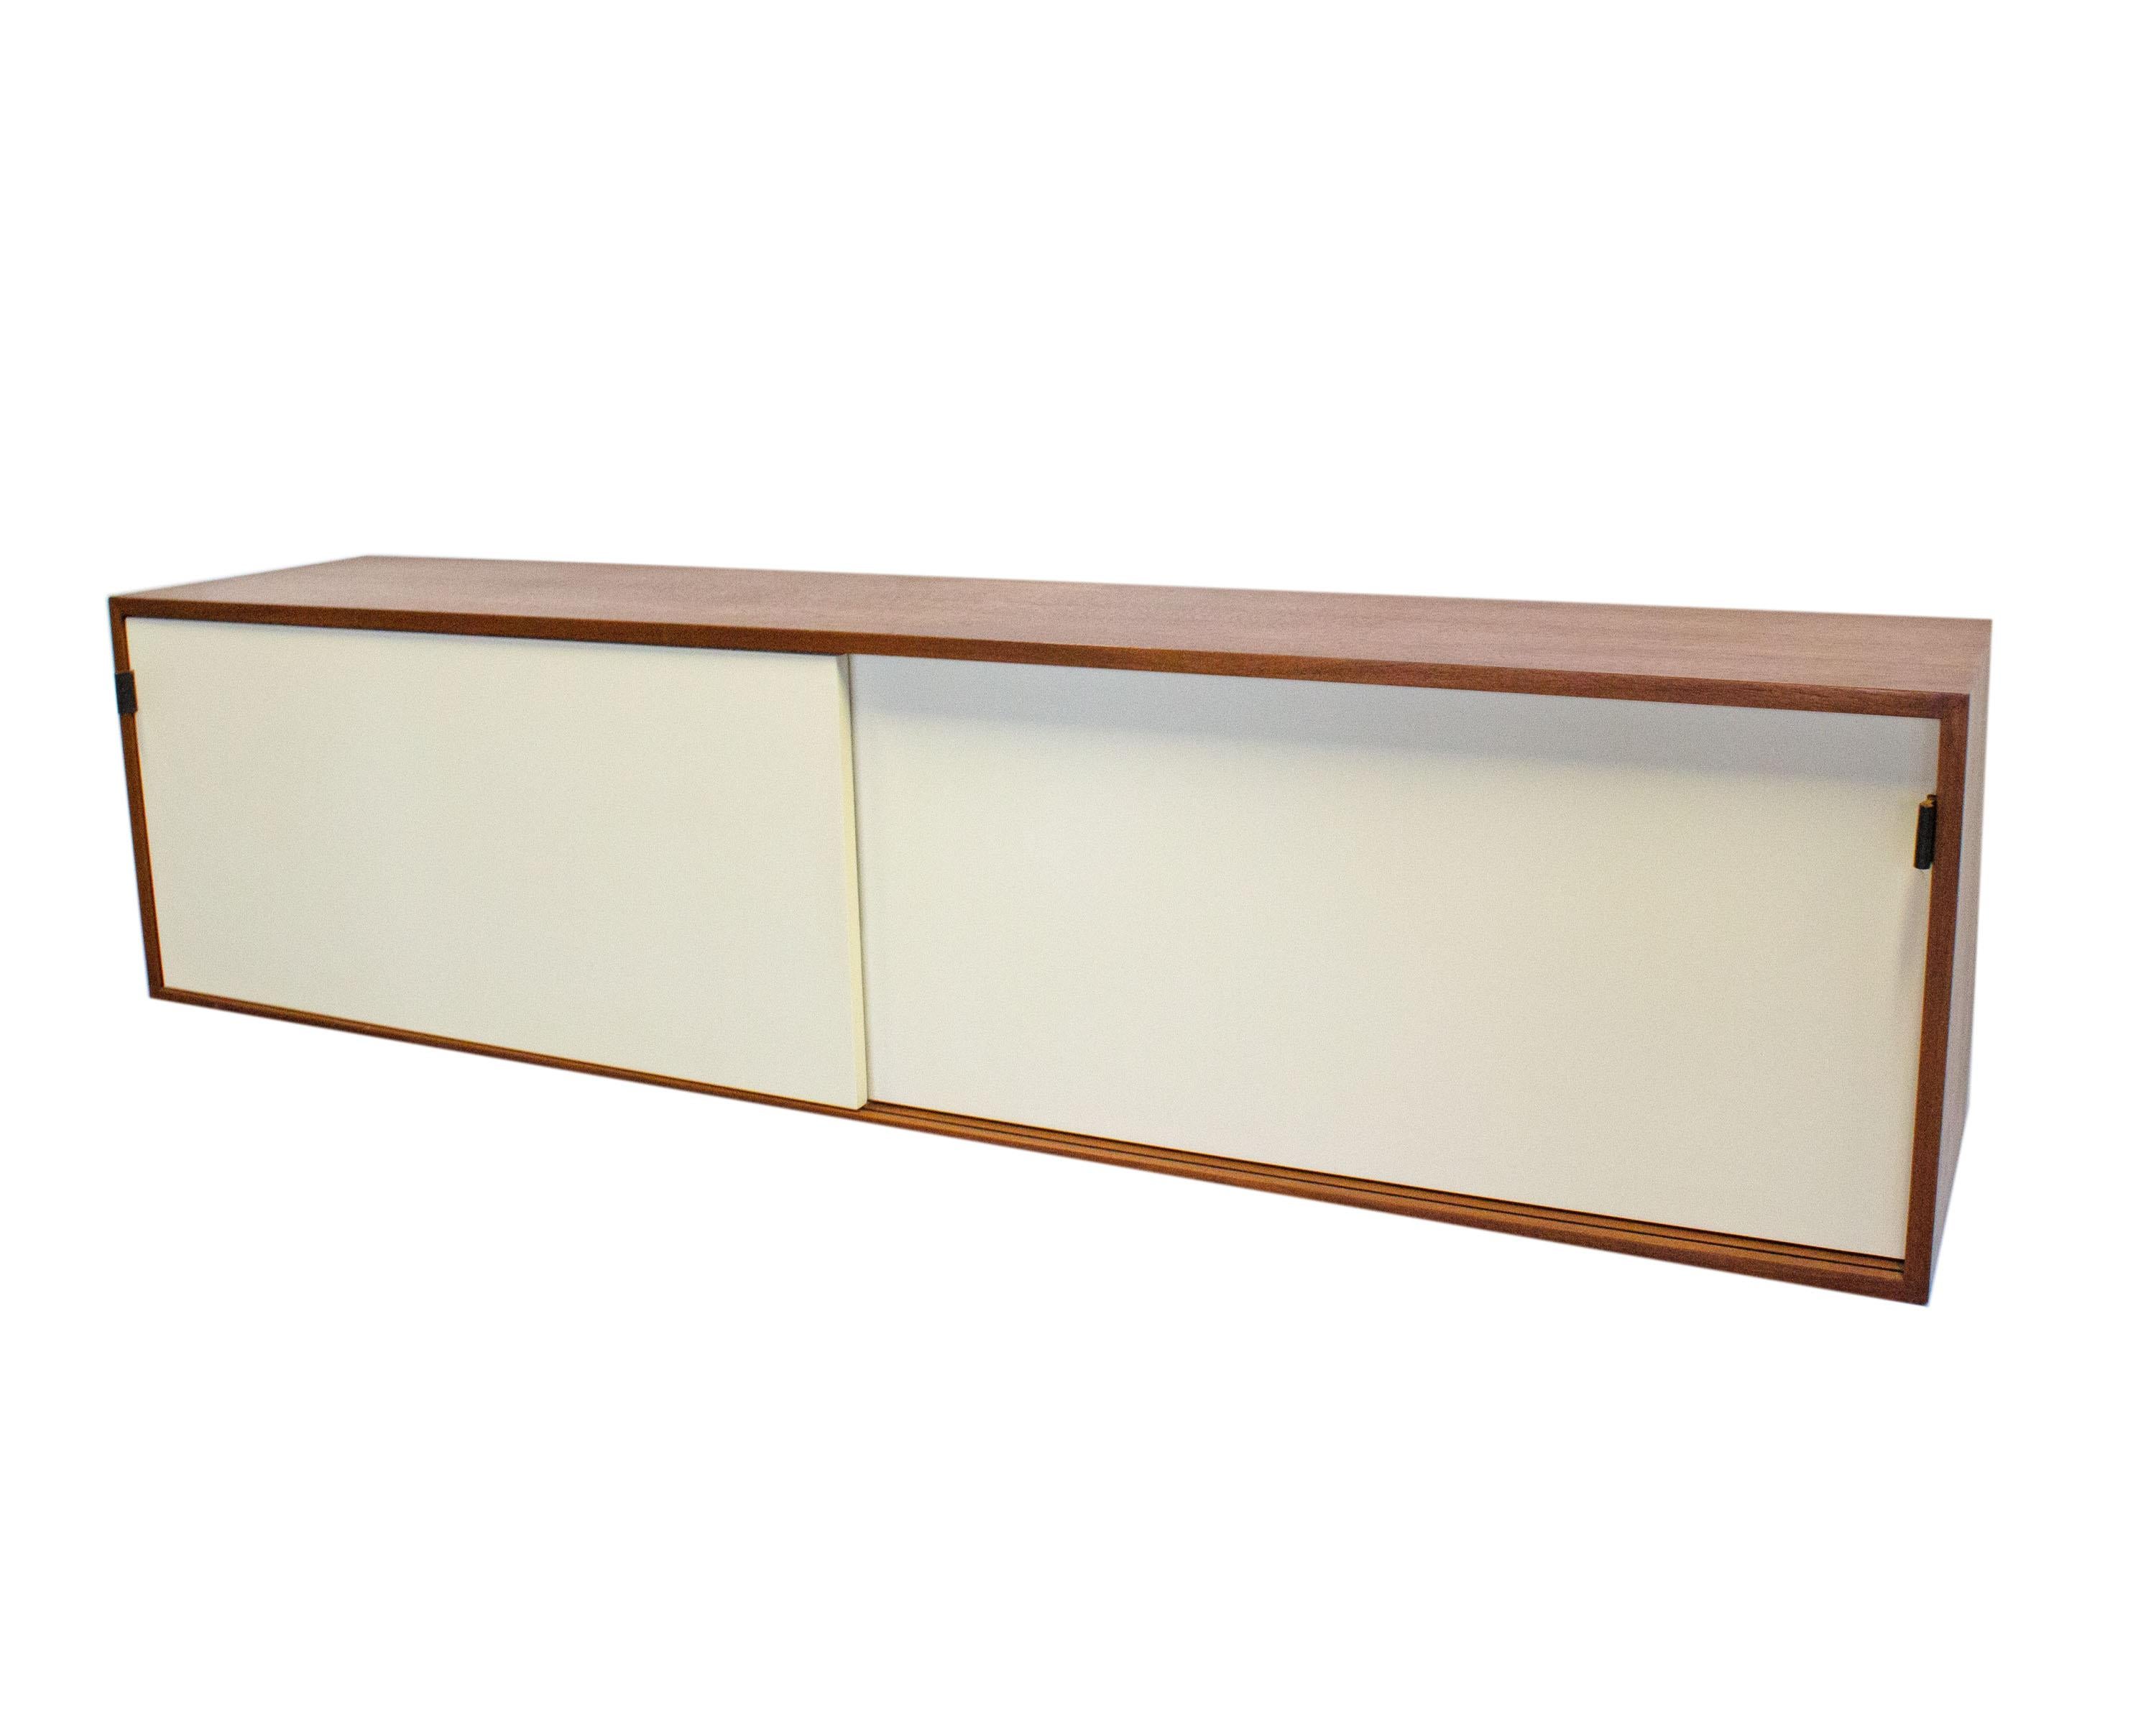 A model 121 W-1 wall mount credenza designed by American designer Florence Knoll (1917-2019) for Knoll International. The credenza has two sliding doors which open to reveal interior storage. The white doors feature the original saddle leather tab